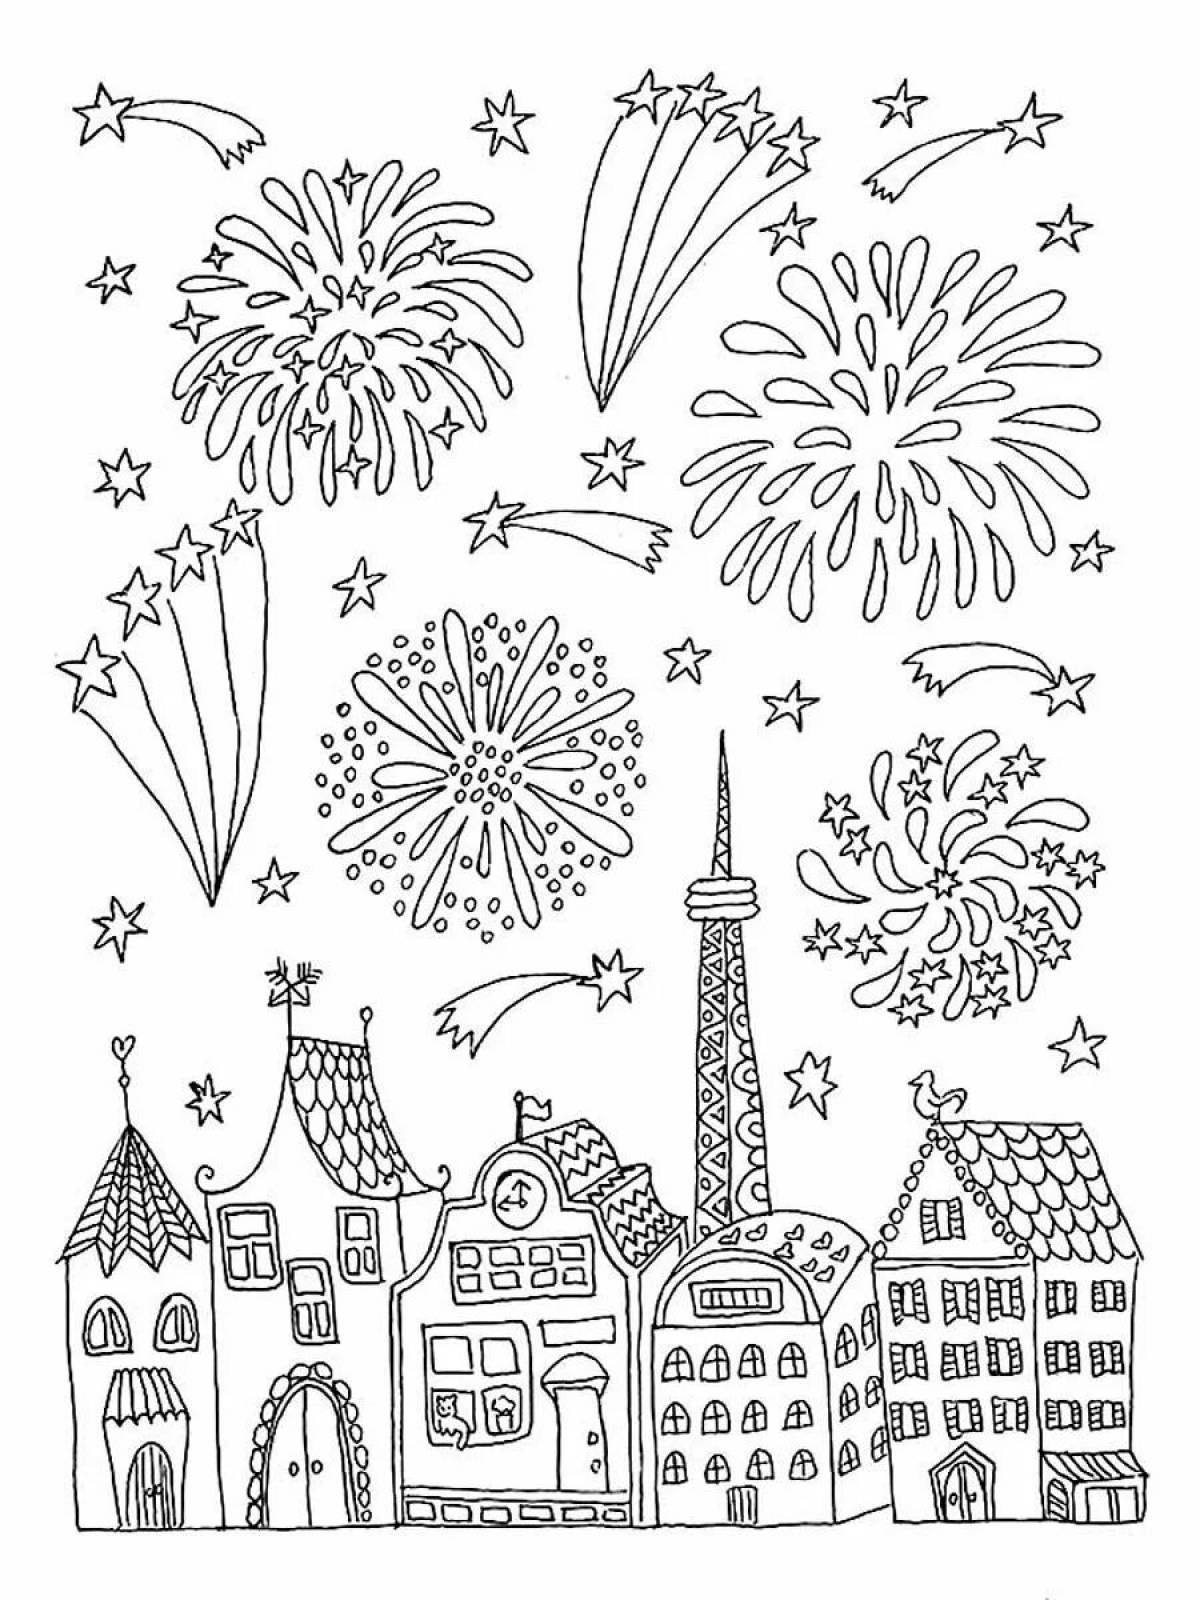 Color-outstanding salute coloring page for children 3-4 years old